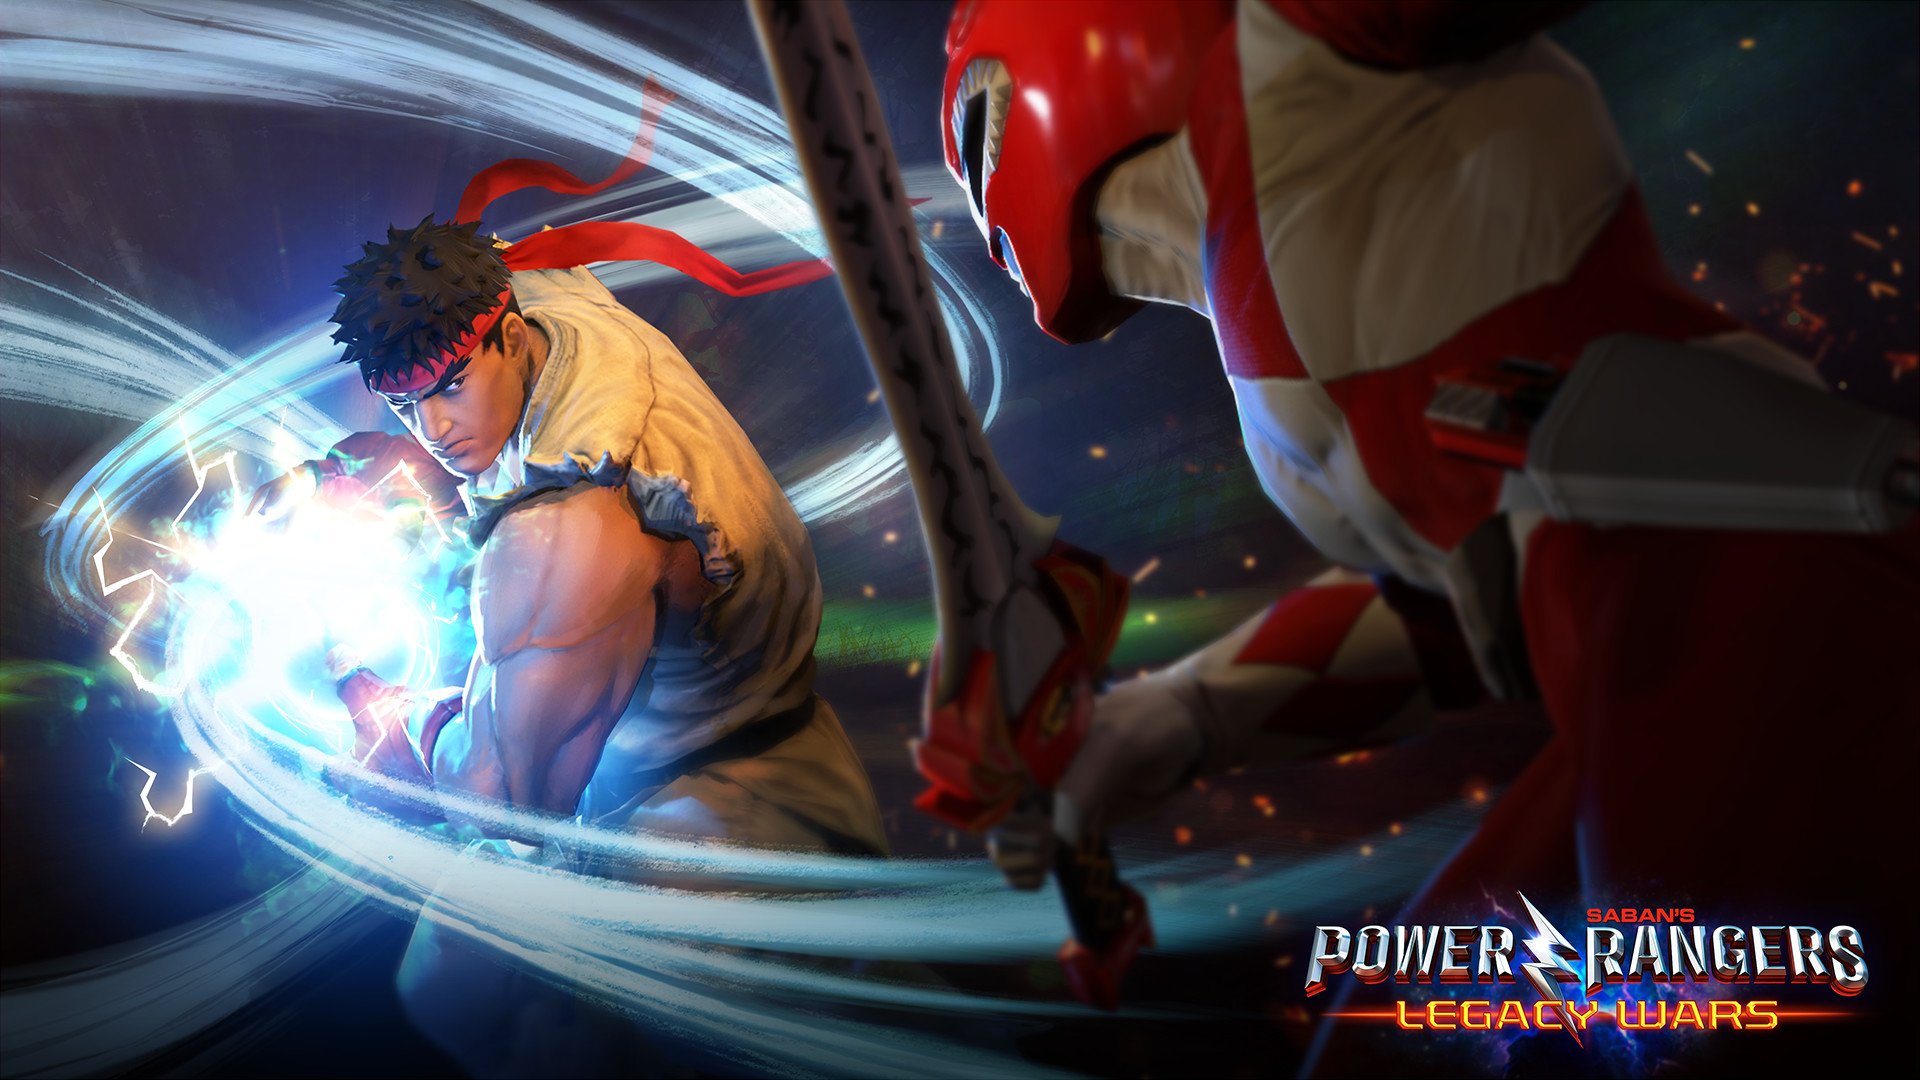 1920x1080 'Power Rangers: Legacy Wars' Is Doing a Crossover With 'Street Fighter' |  Inverse